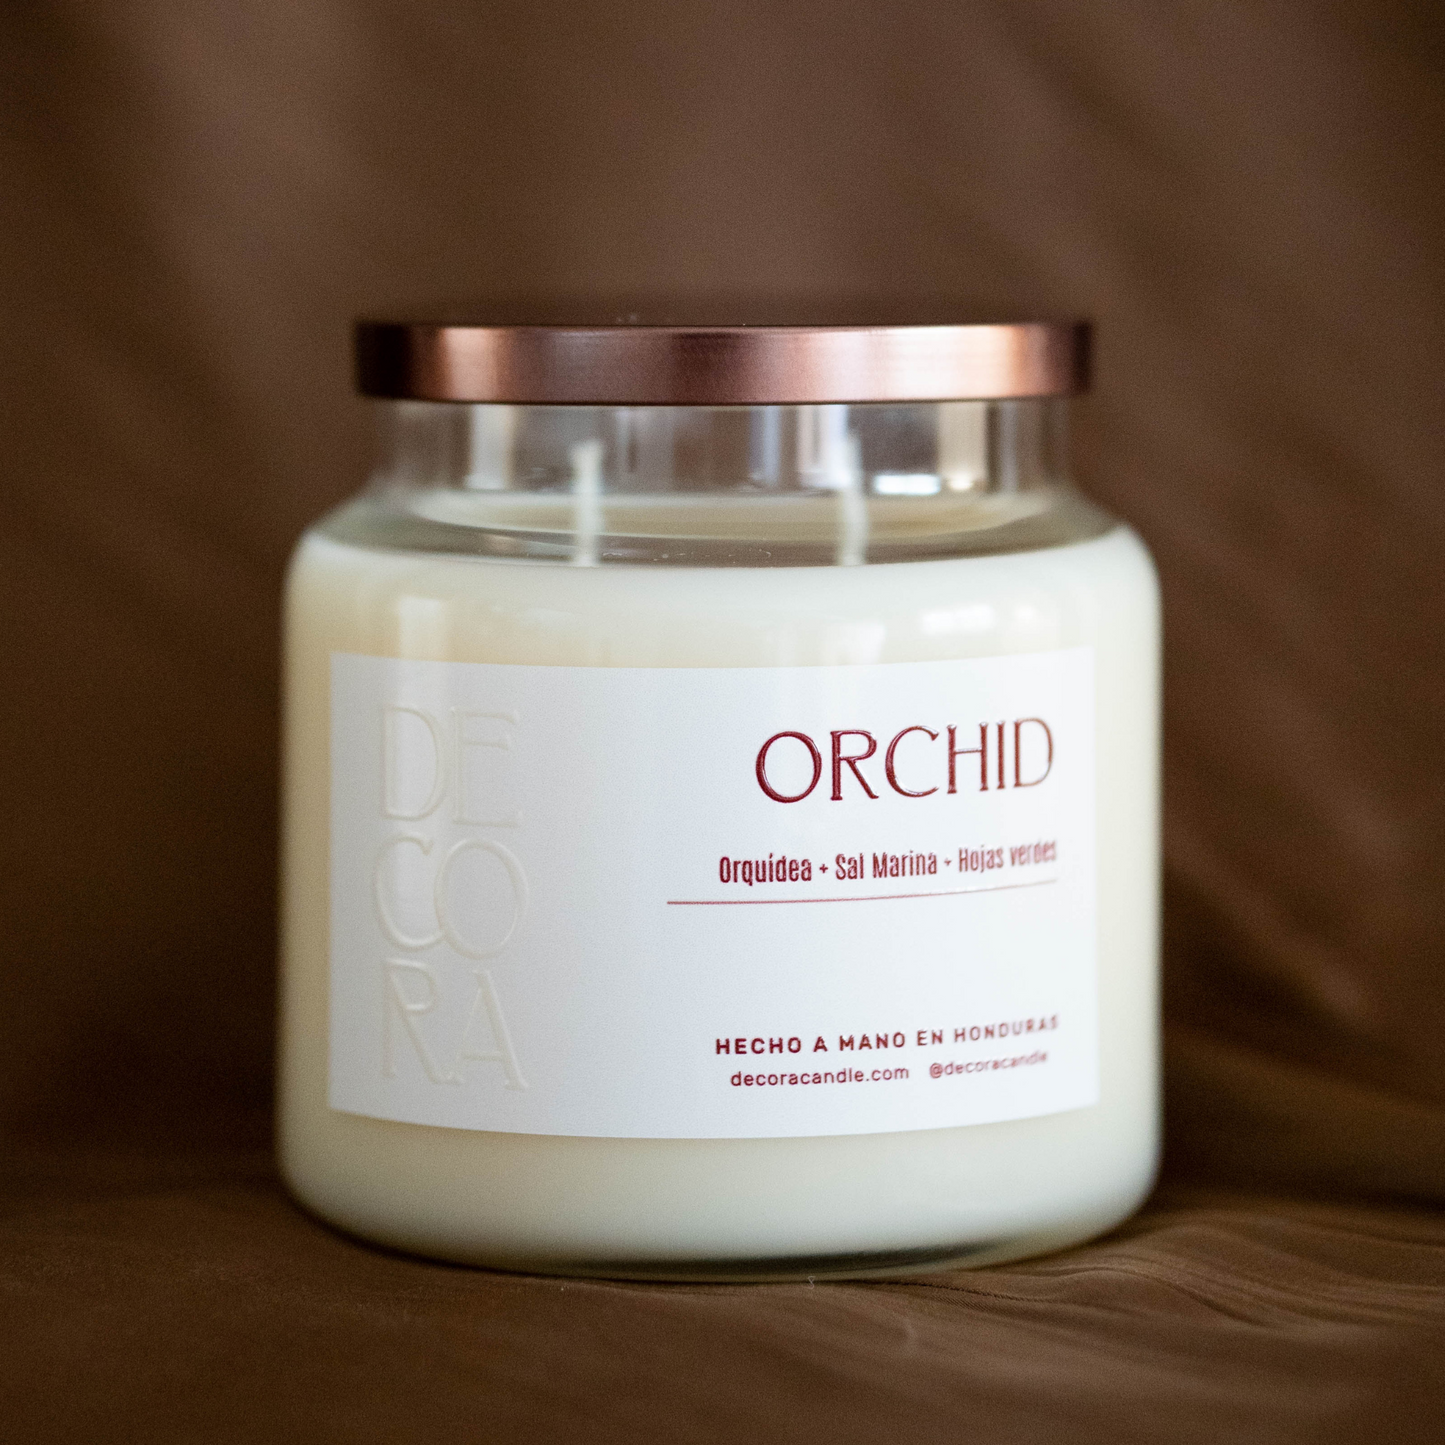 Orchid - Apothecary Candle 16 oz